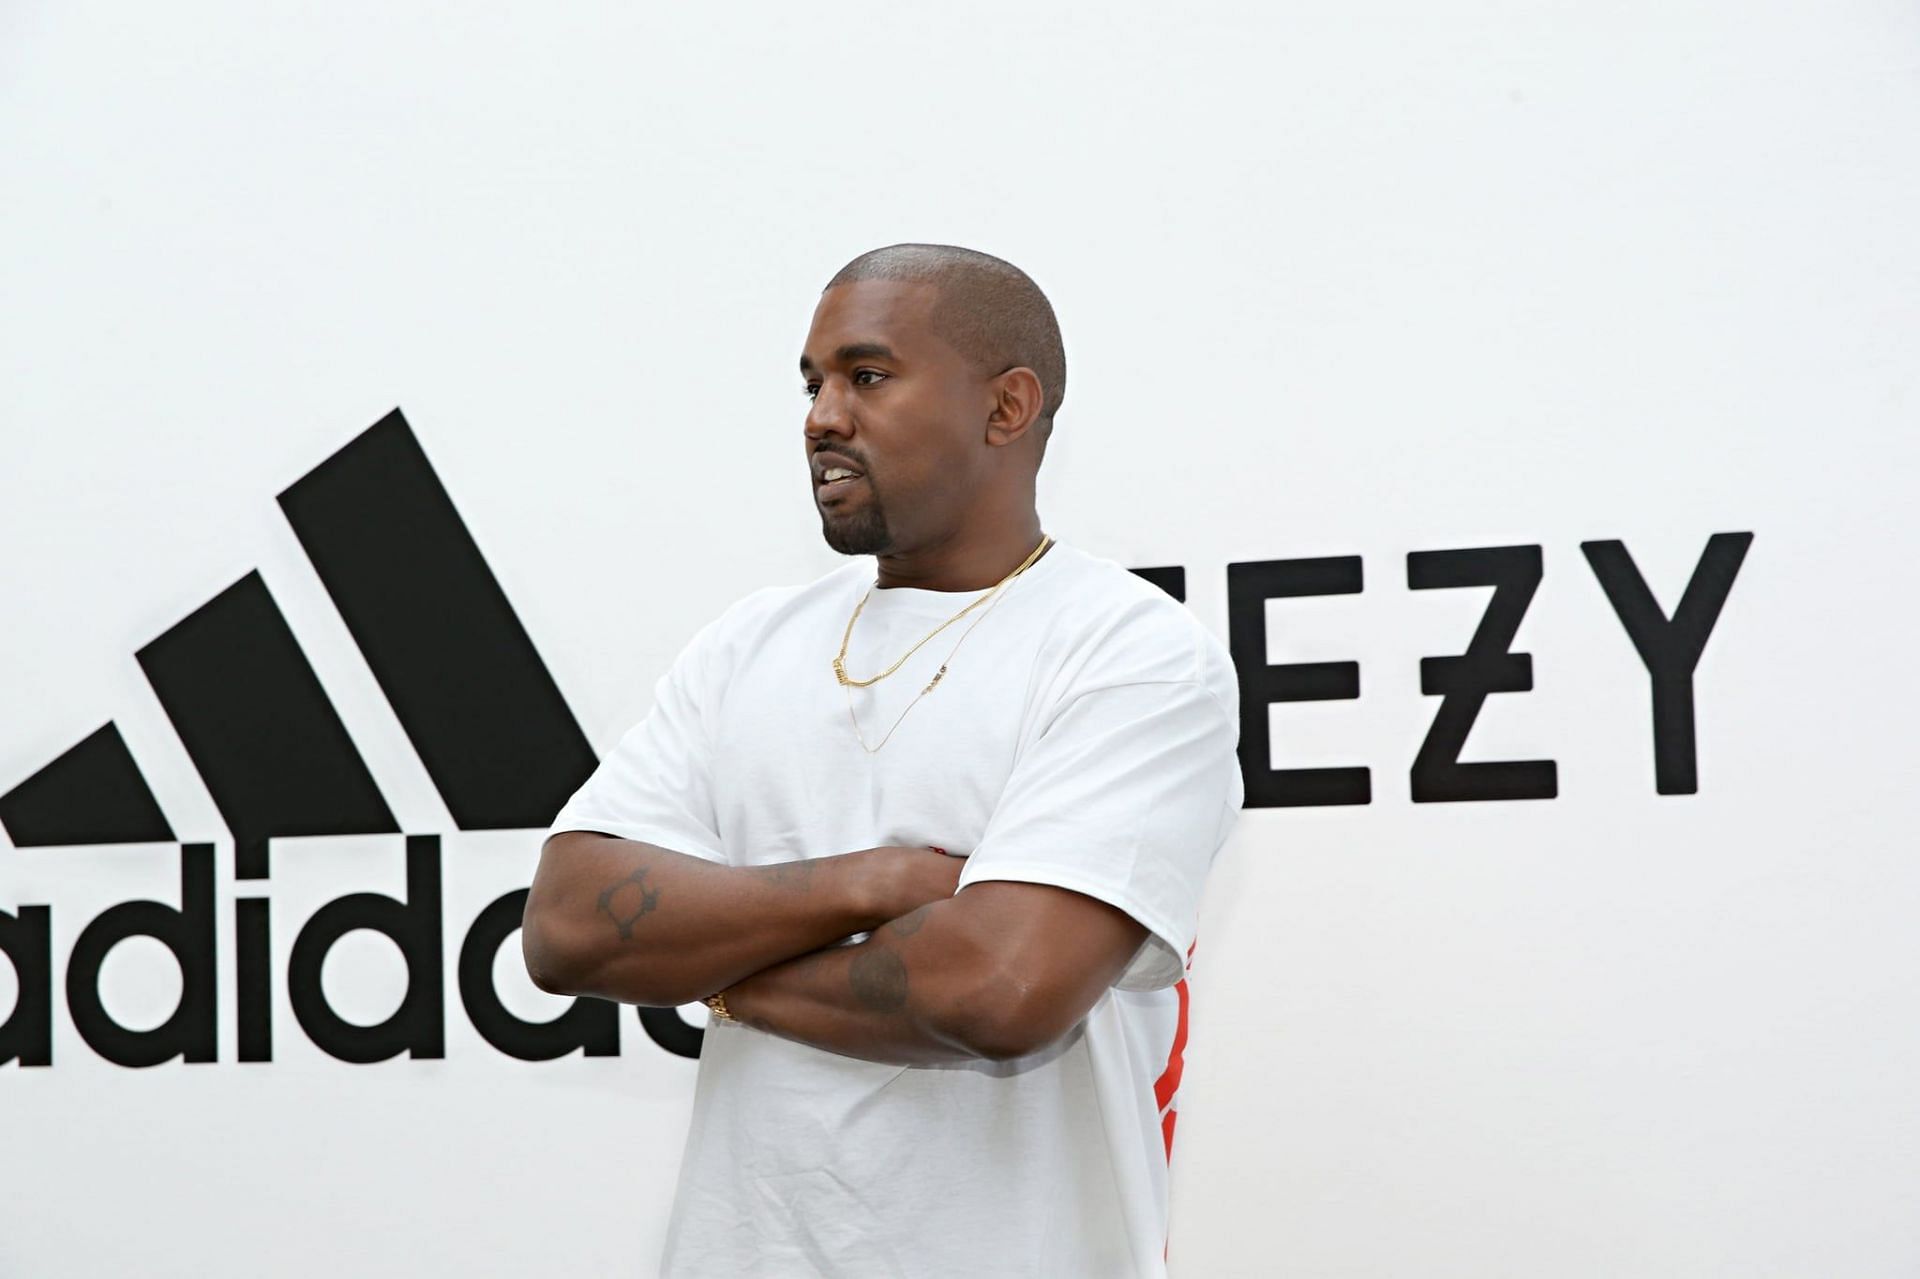 Adidas ends partnership with Kanye West (Image via Getty Images)